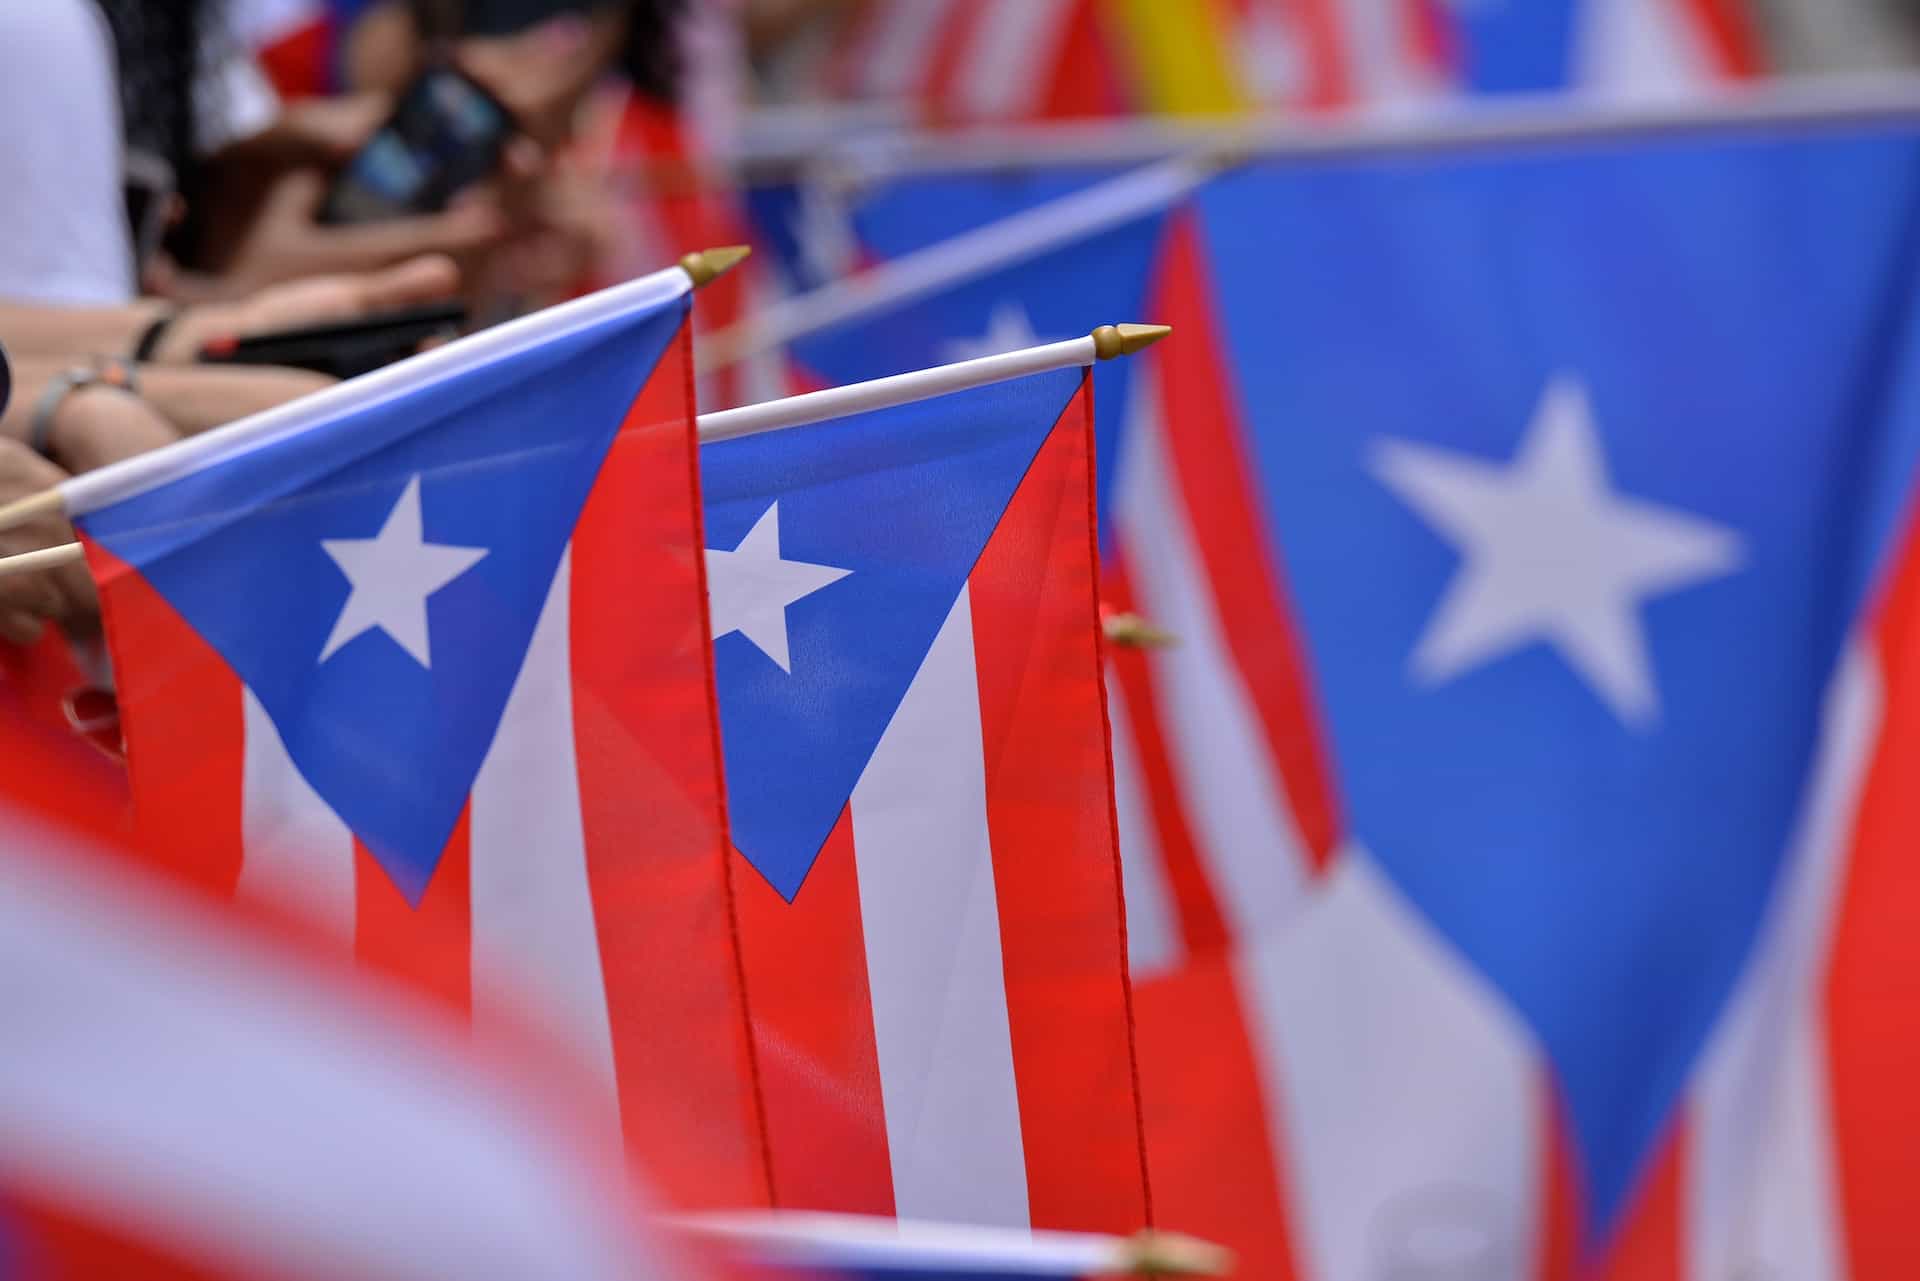 Many Puerto Rican flags hang on sticks.